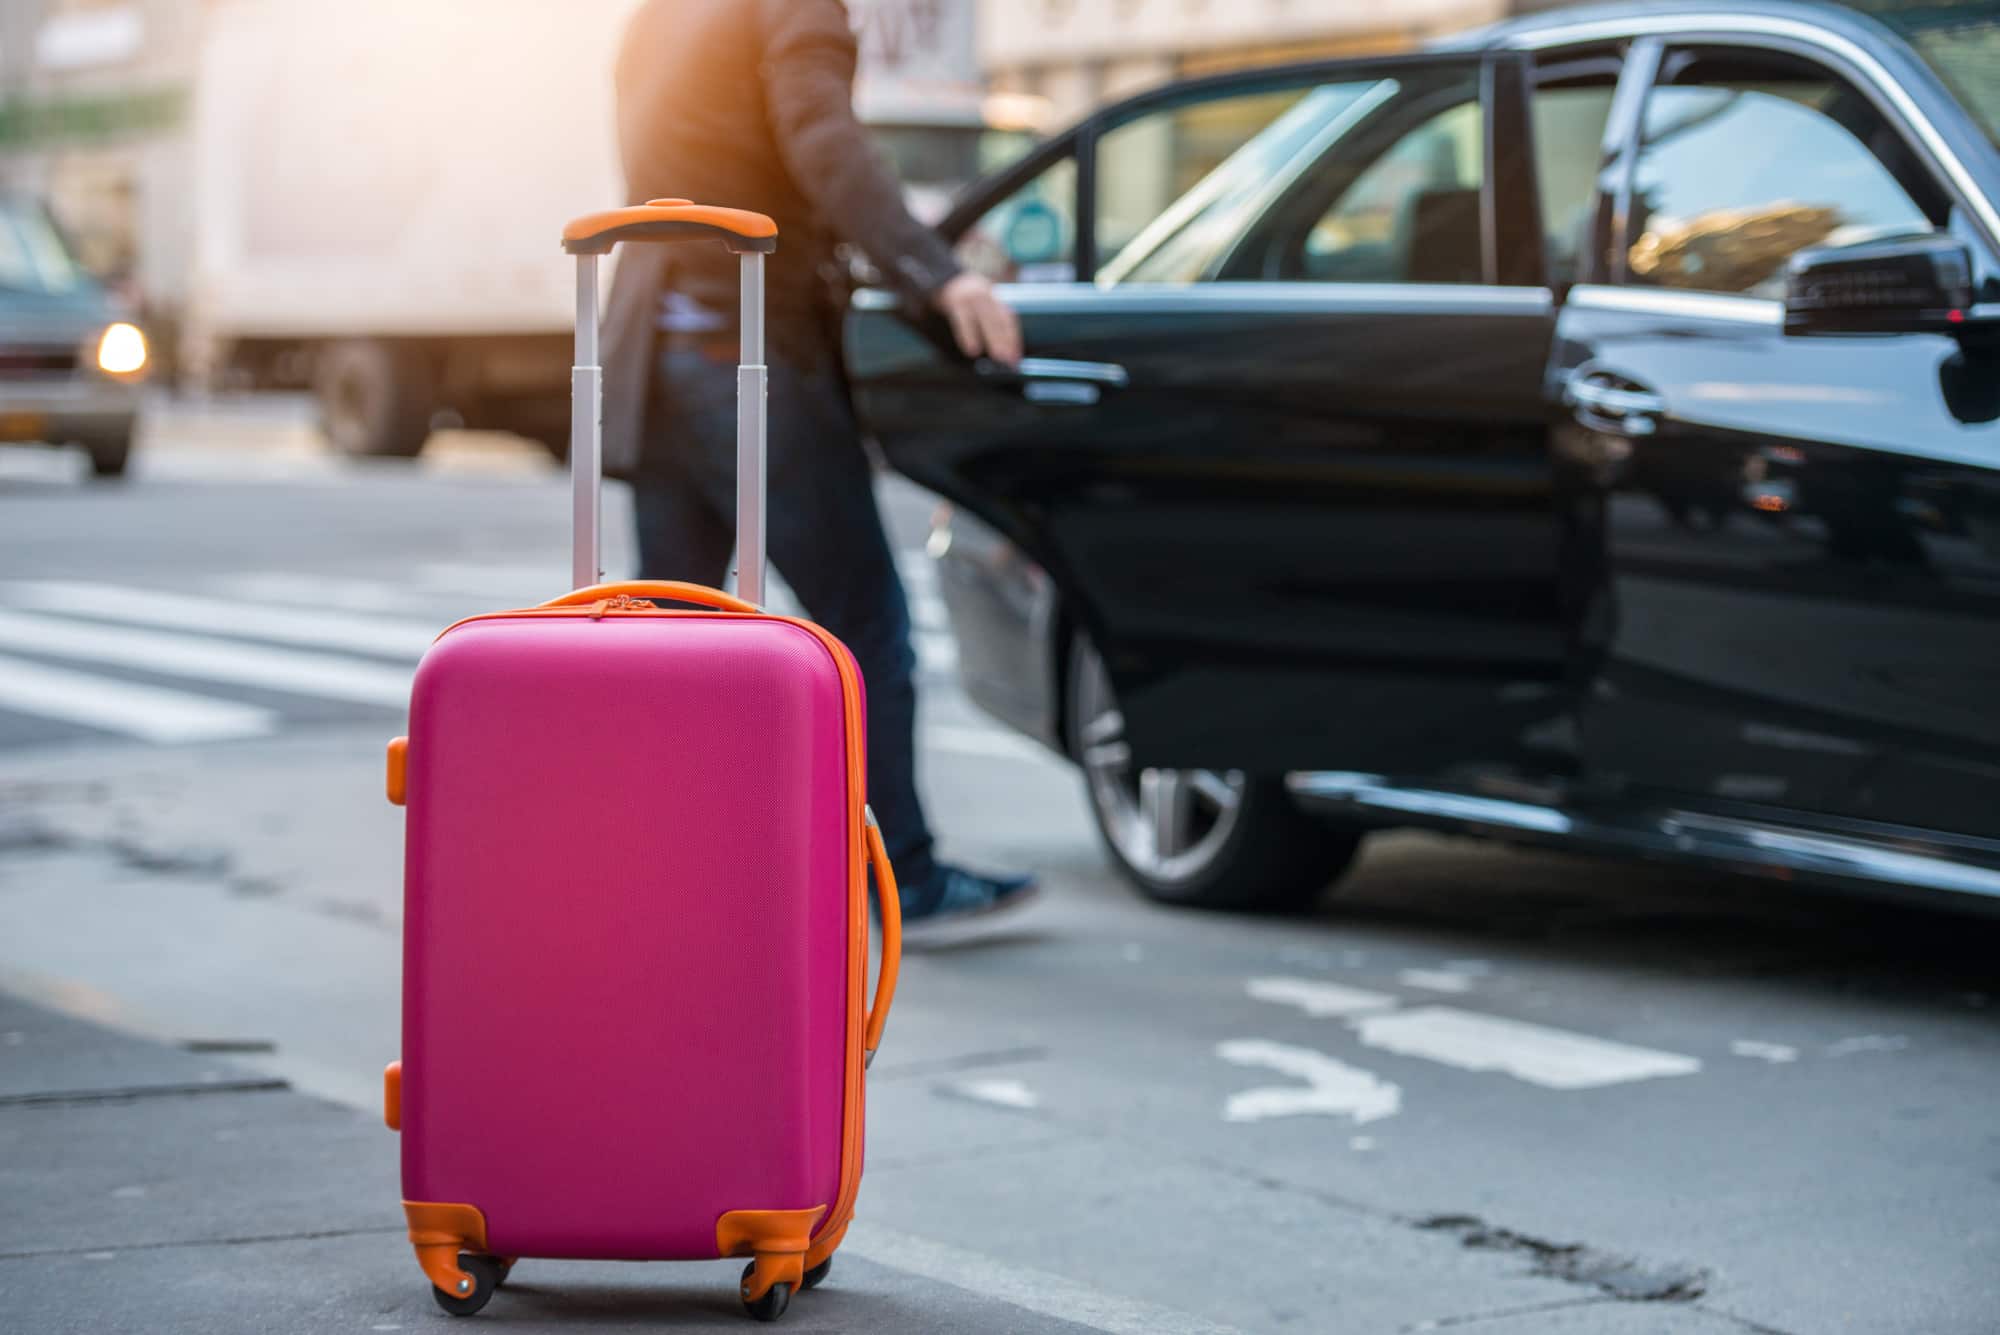 Taxi airport passengers face new luggage charges